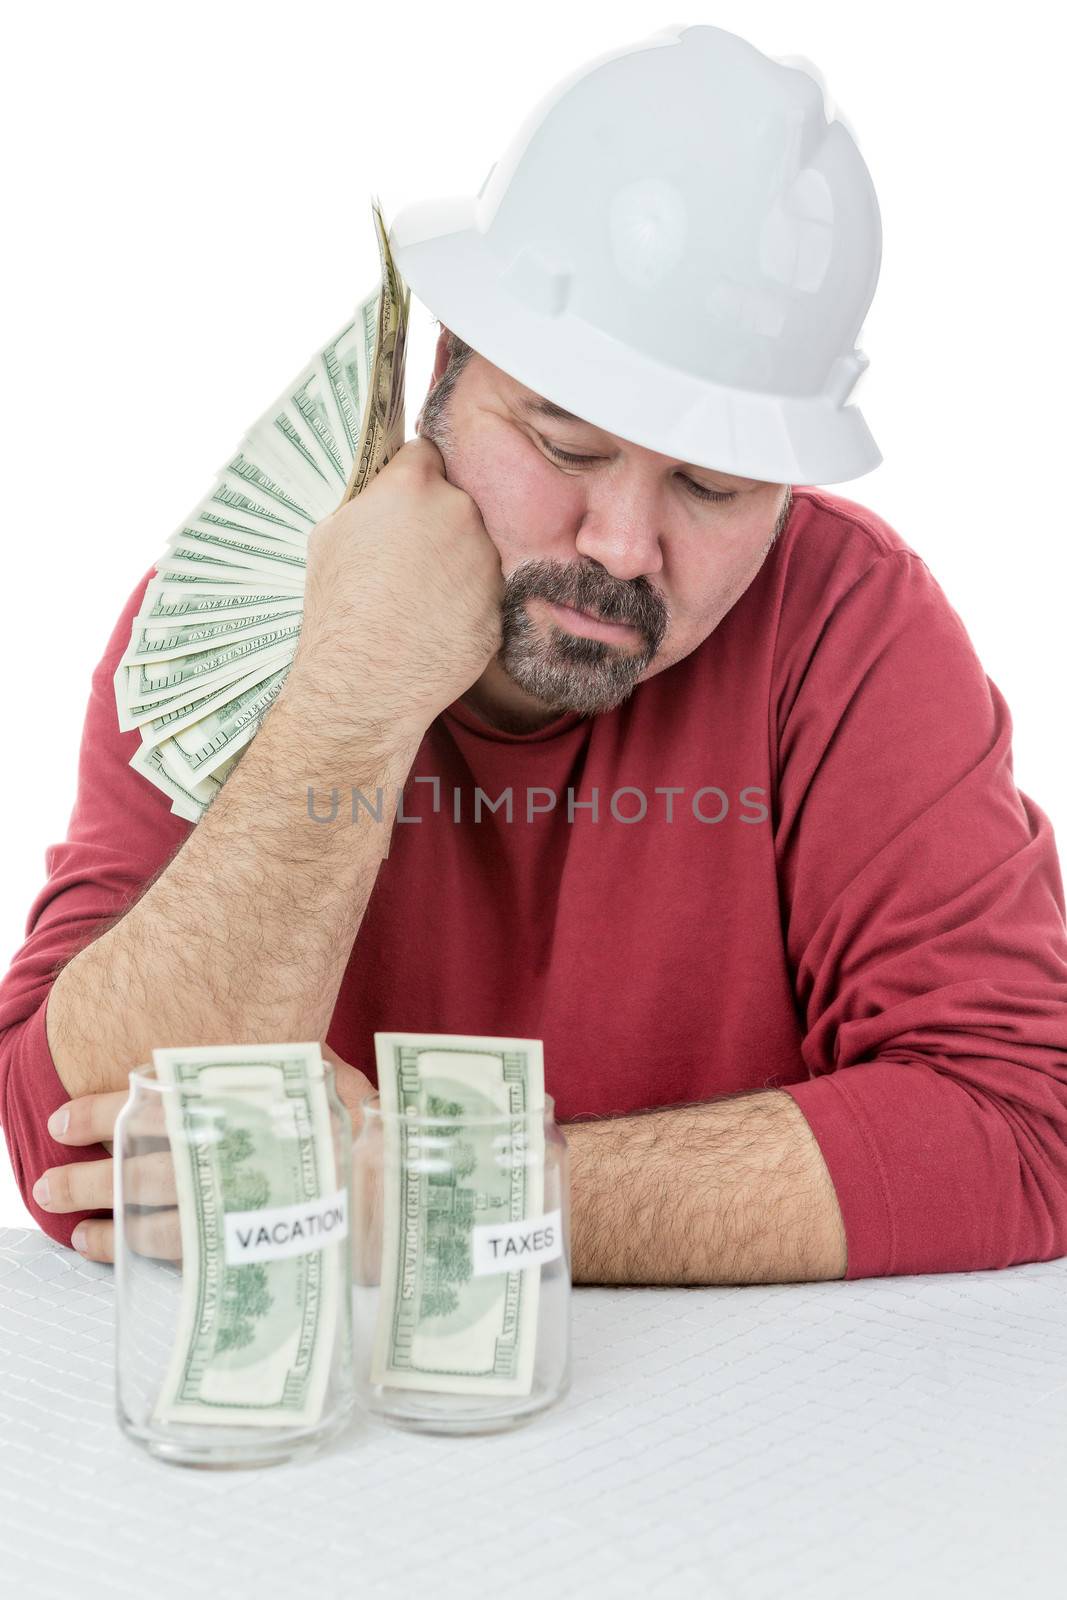 Depressed construction worker deciding how to split money between vacations and the tax obligations